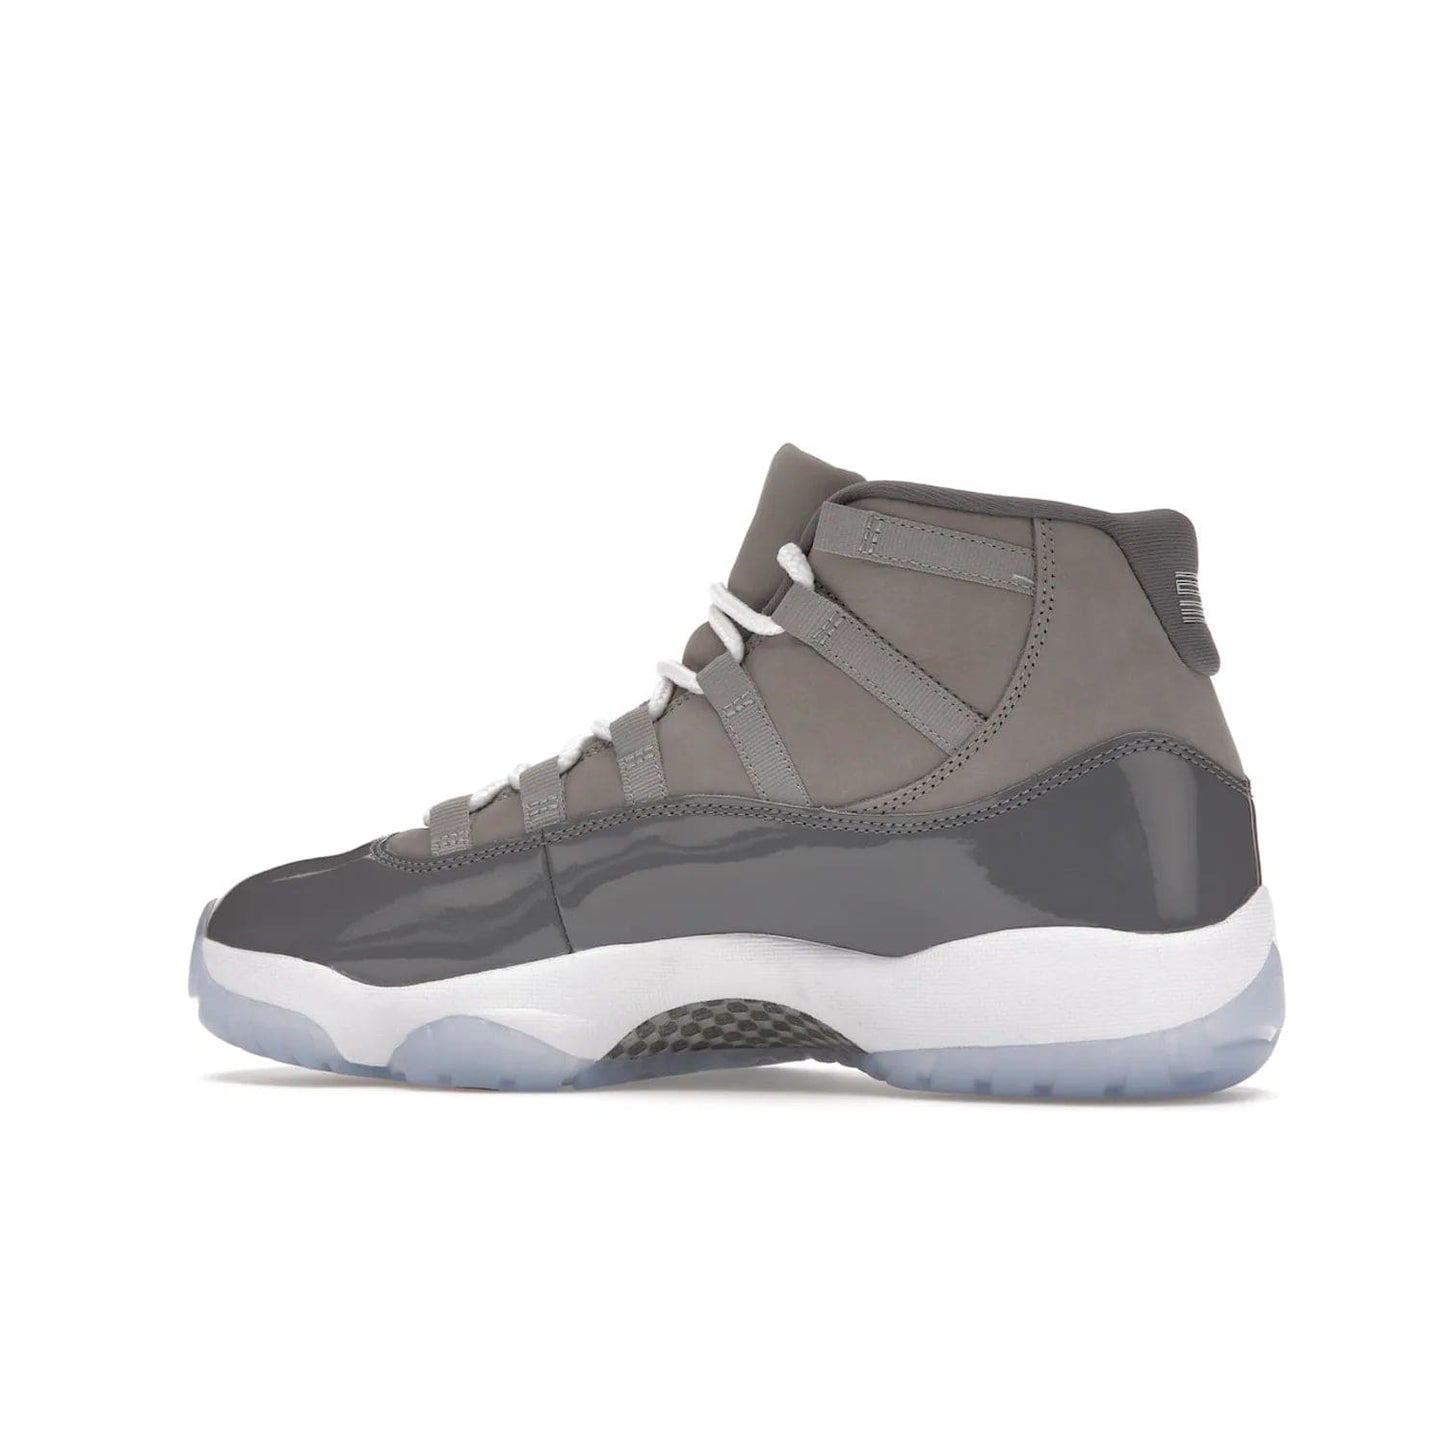 Jordan 11 Retro Cool Grey (2021) - Image 21 - Only at www.BallersClubKickz.com - Shop the Air Jordan 11 Retro Cool Grey (2021) for a must-have sneaker with a Cool Grey Durabuck upper, patent leather overlays, signature Jumpman embroidery, a white midsole, icy blue translucent outsole, and Multi-Color accents.  Released in December 2021 for $225.